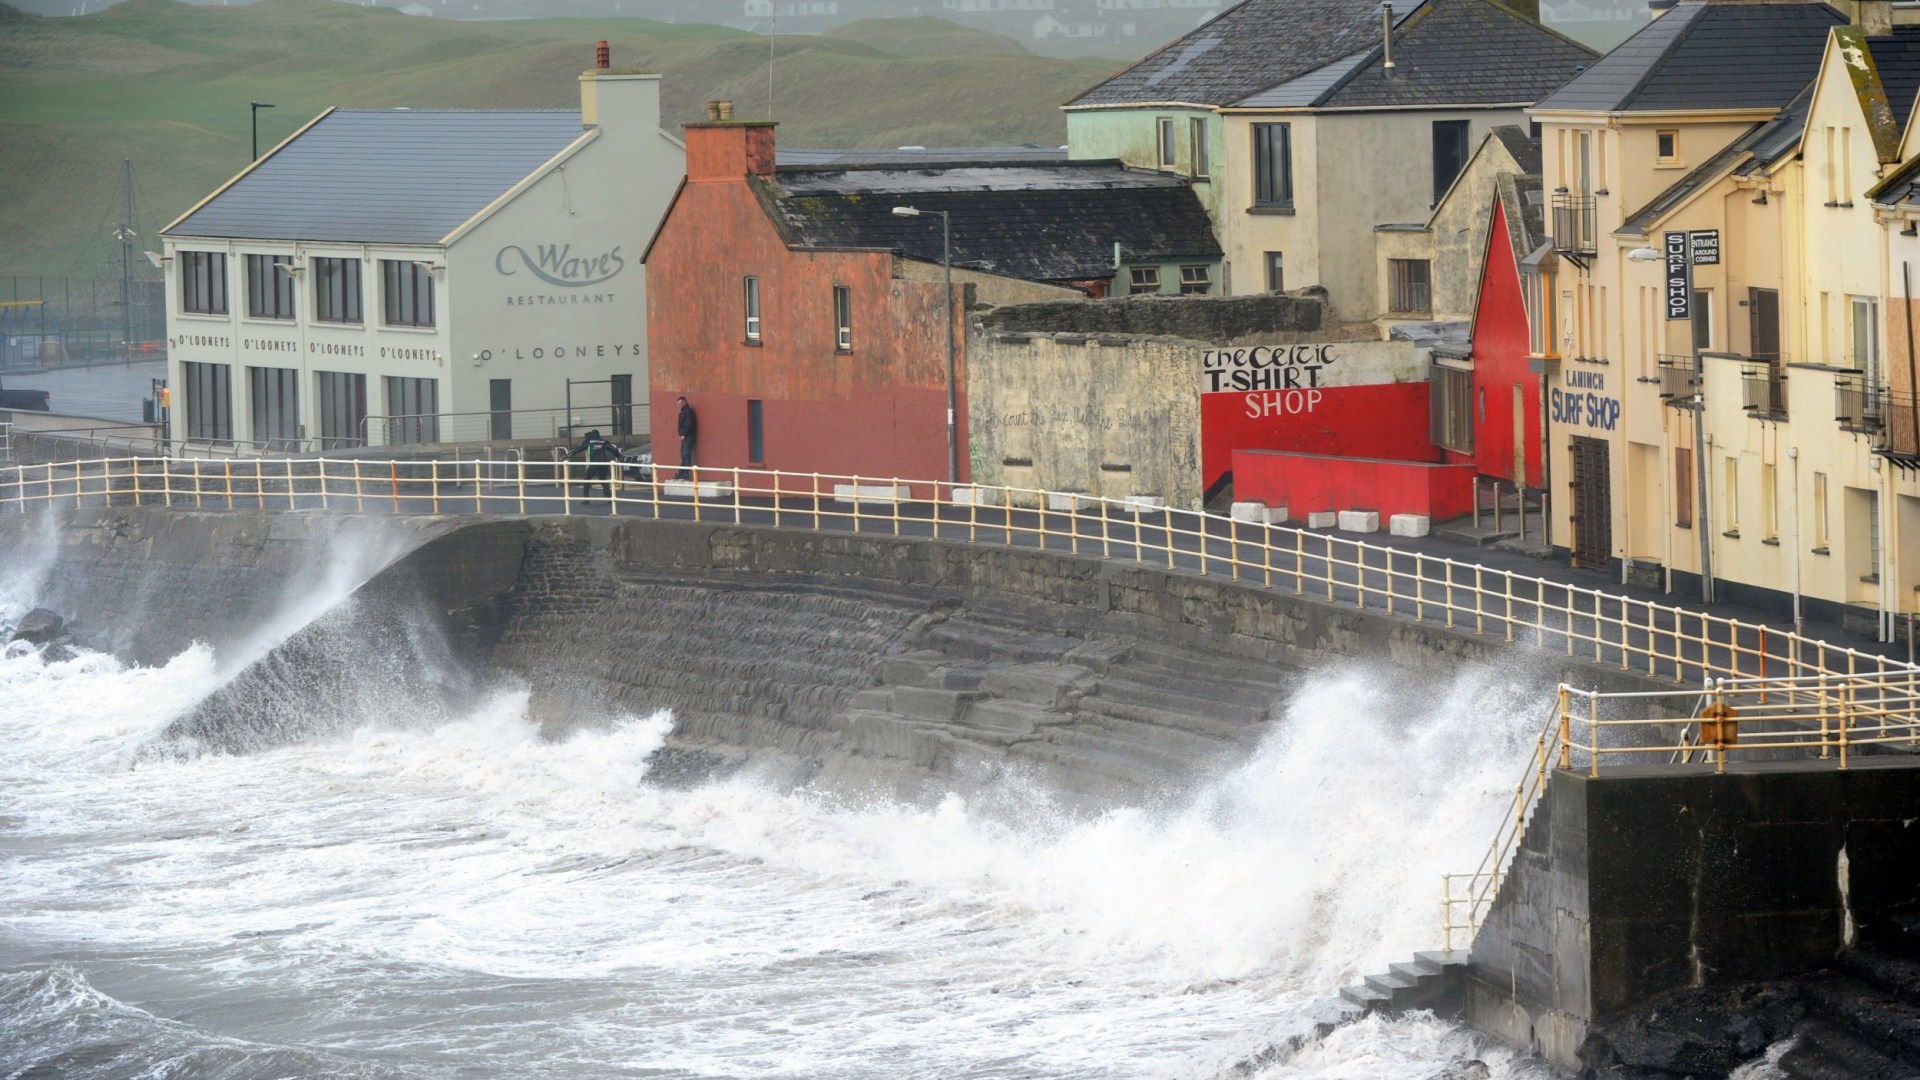 Popular Irish attractions forced to close over Storm Kathleen ‘extreme weather’ as country set for winds of 130kmh [Video]